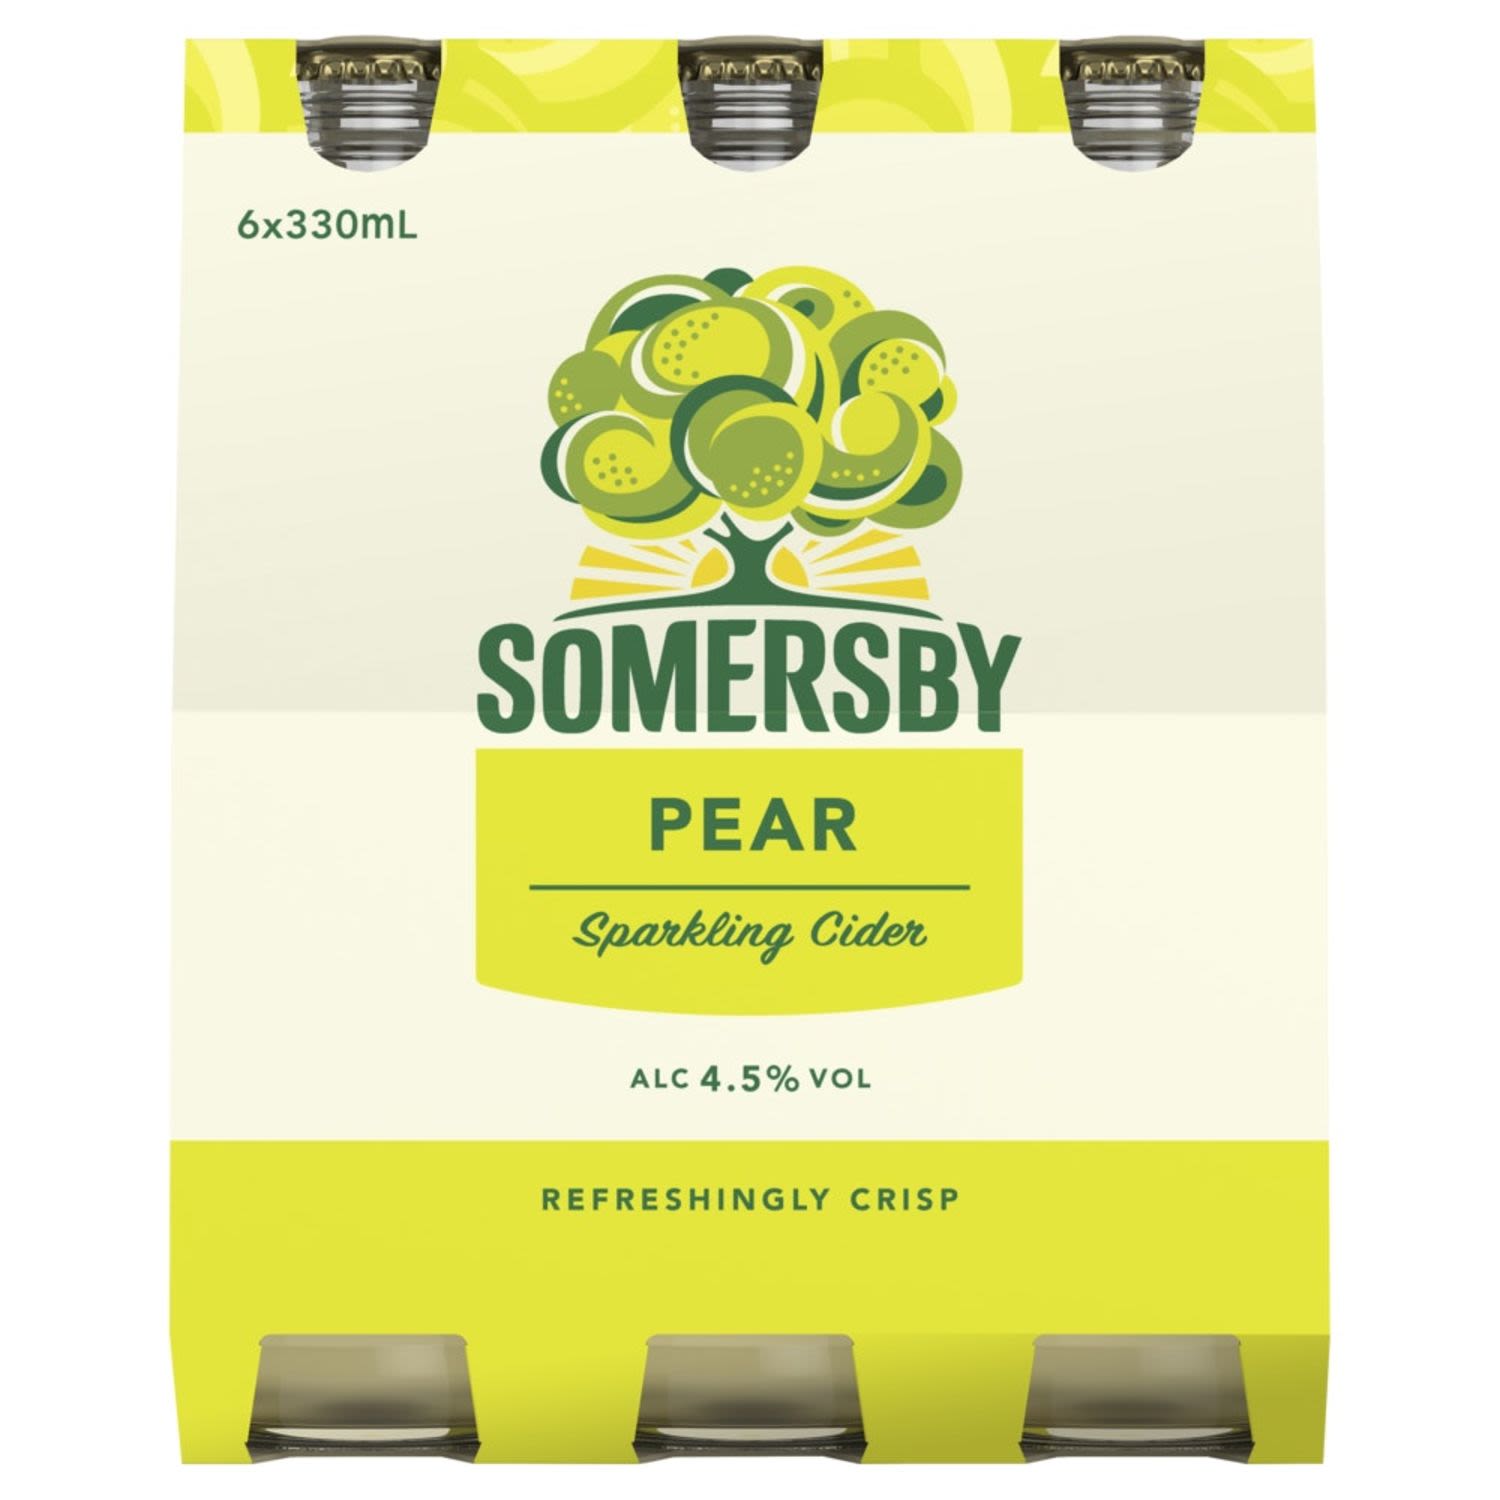 Somersby Pear Cider is a refreshing and crisp cider made from fermented pear juice and natural pear flavouring. There are no artificial sweeteners, flavours or colourings added and it's sparkling and refreshing nature makes it a perfect addition to any Sunday afternoon.<br /> <br />Alcohol Volume: 4.50%<br /><br />Pack Format: 6 Pack<br /><br />Standard Drinks: 1.2</br /><br />Pack Type: Bottle<br /><br />Country of Origin: Australia<br />